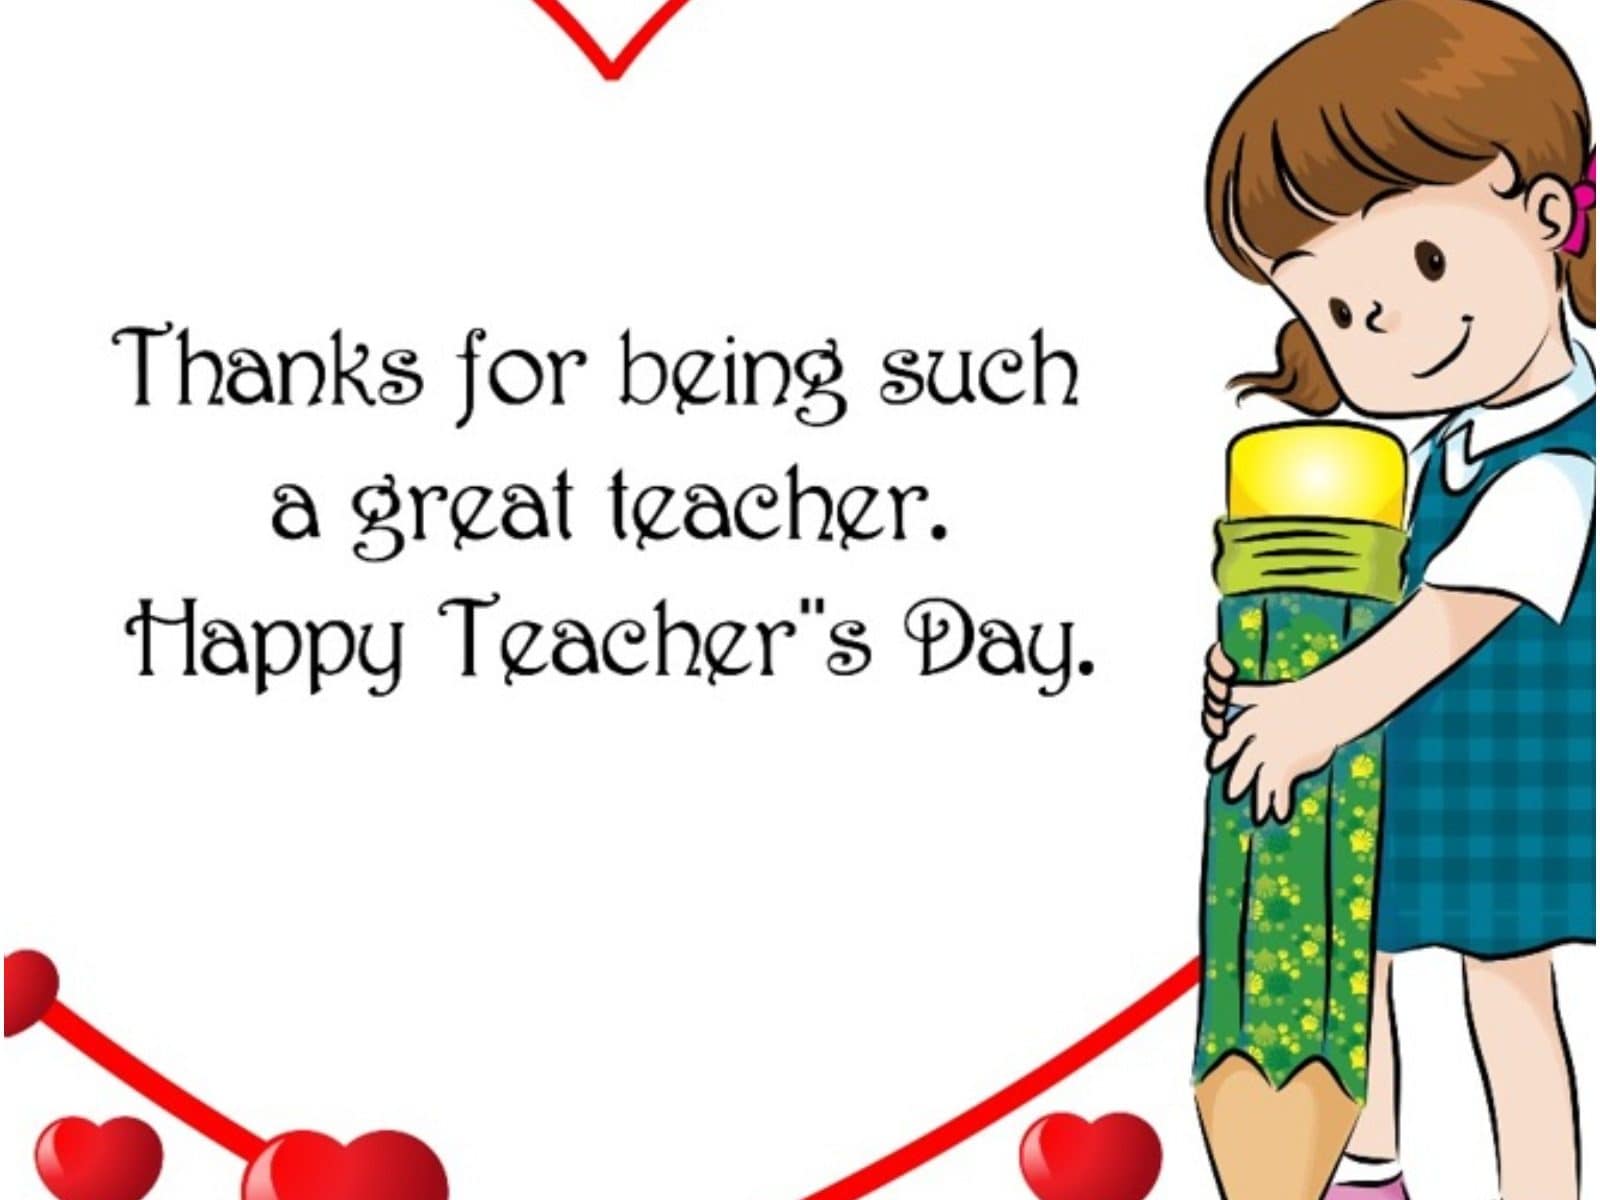 Happy Teachers' Day 2021: Image, Wishes, Quotes, Messages and WhatsApp Greetings to Share